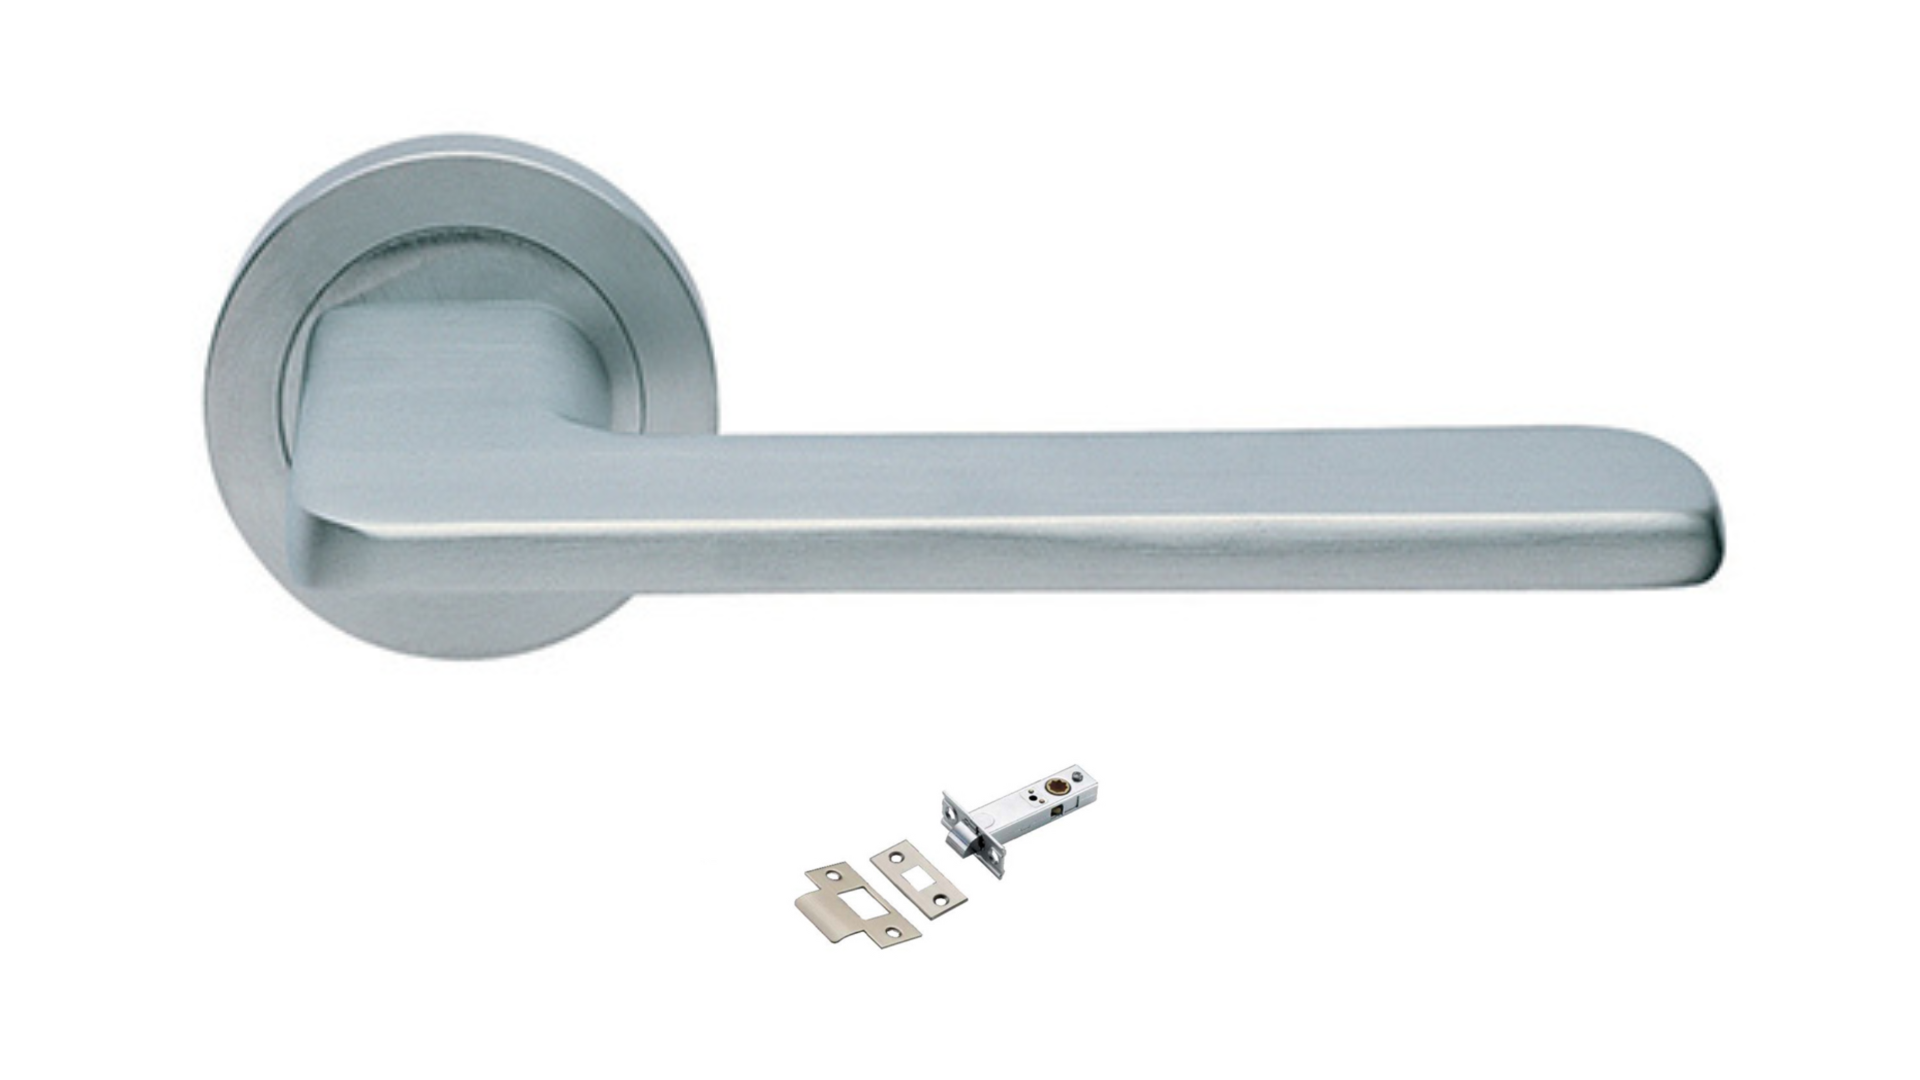 The Blade door handle in satin chrome with a tubular latch underneath on a white background.